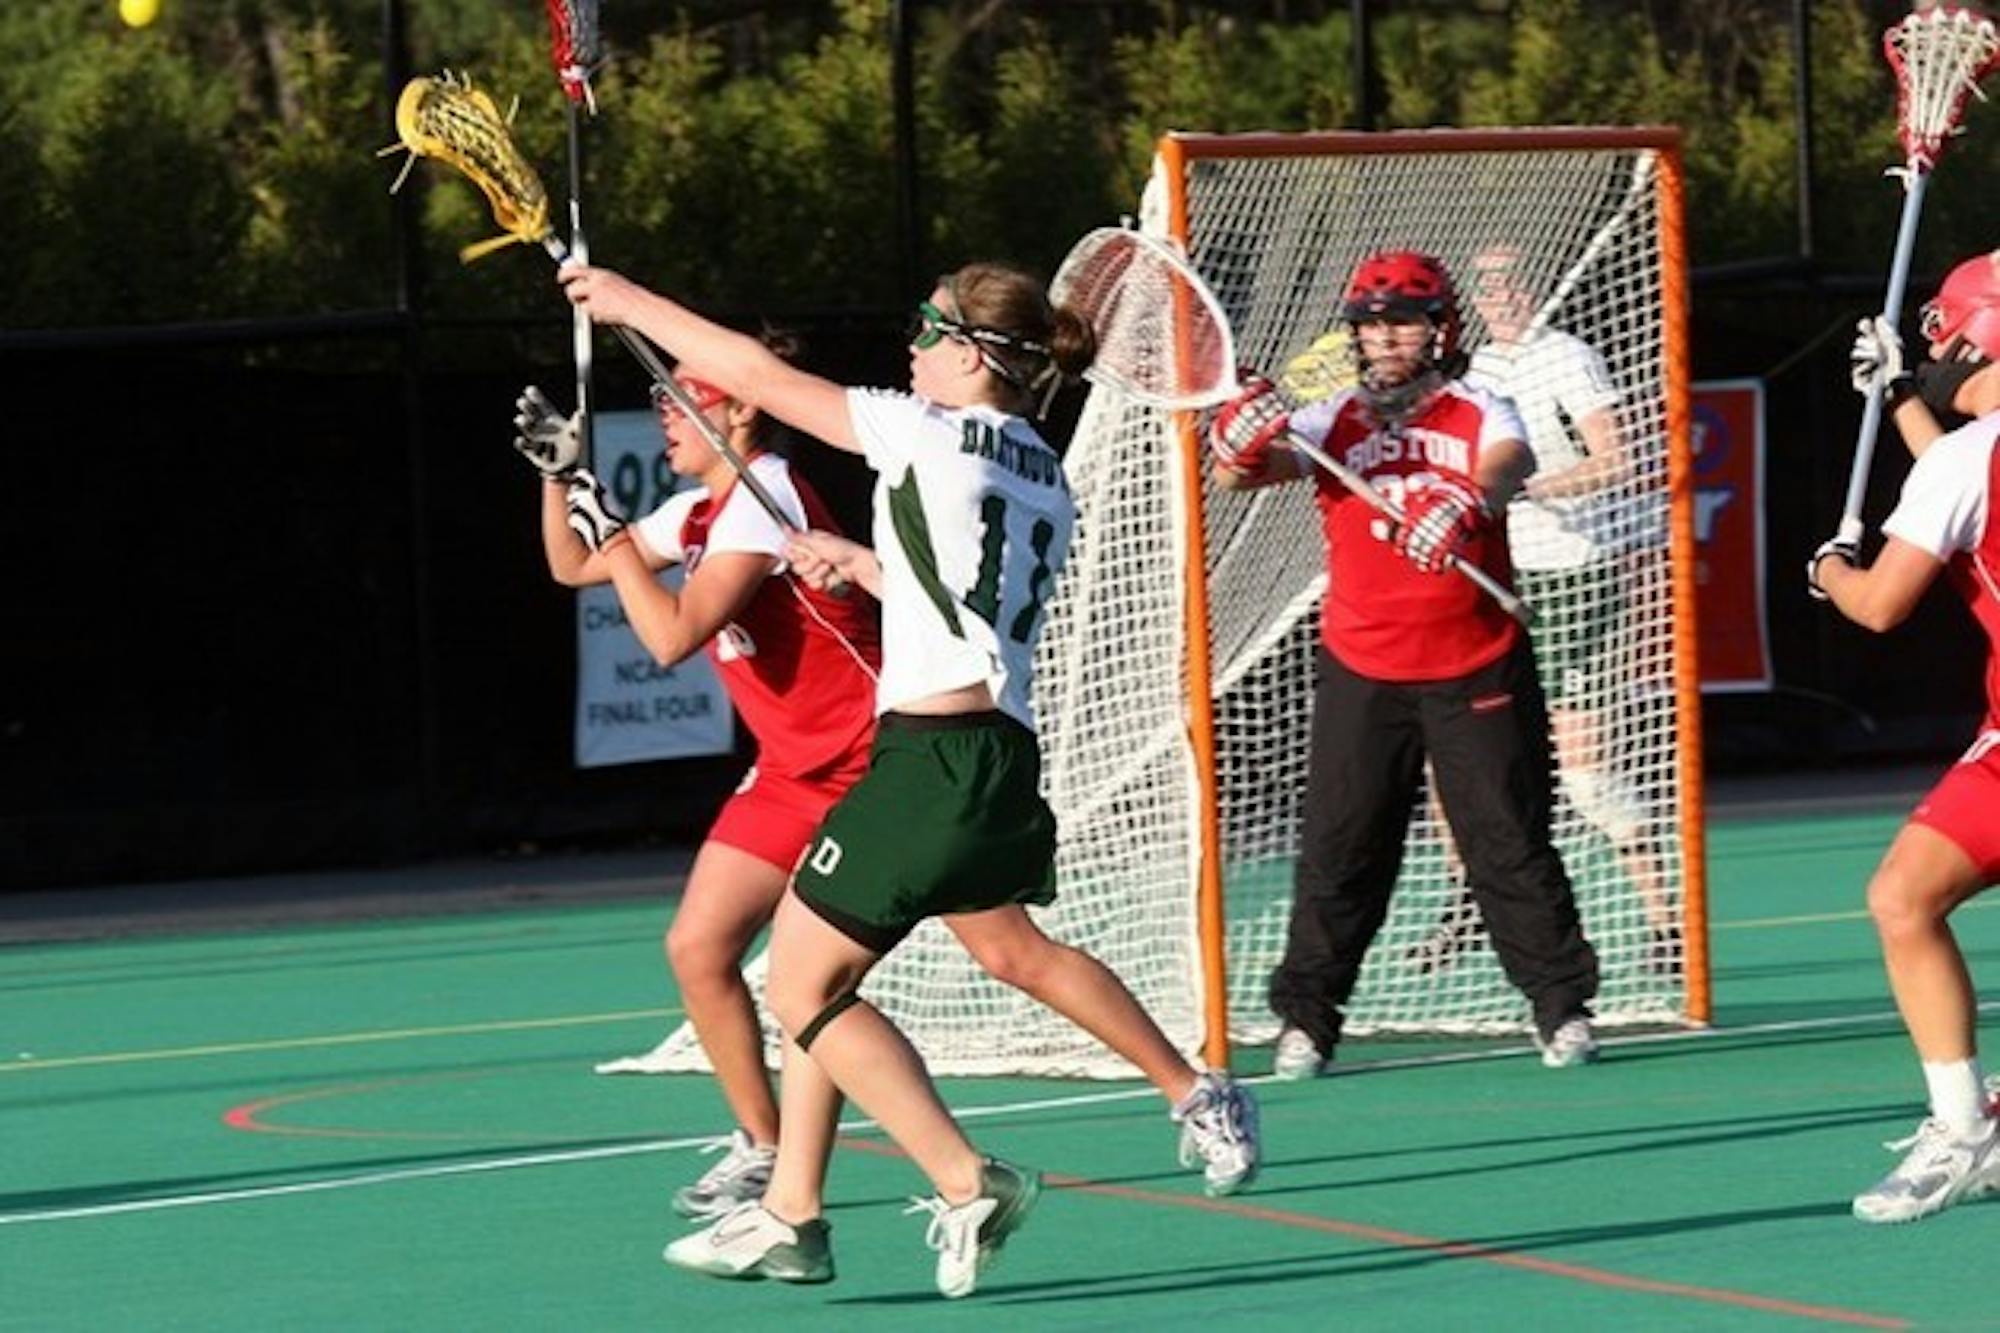 After defeating BU 11-5 two weeks ago on its home turf, Annie Leibovitz '06 and the Big Green are hoping for a similar result versus the same team on the same field Sunday in the first round of the NCAA Division I tournament.